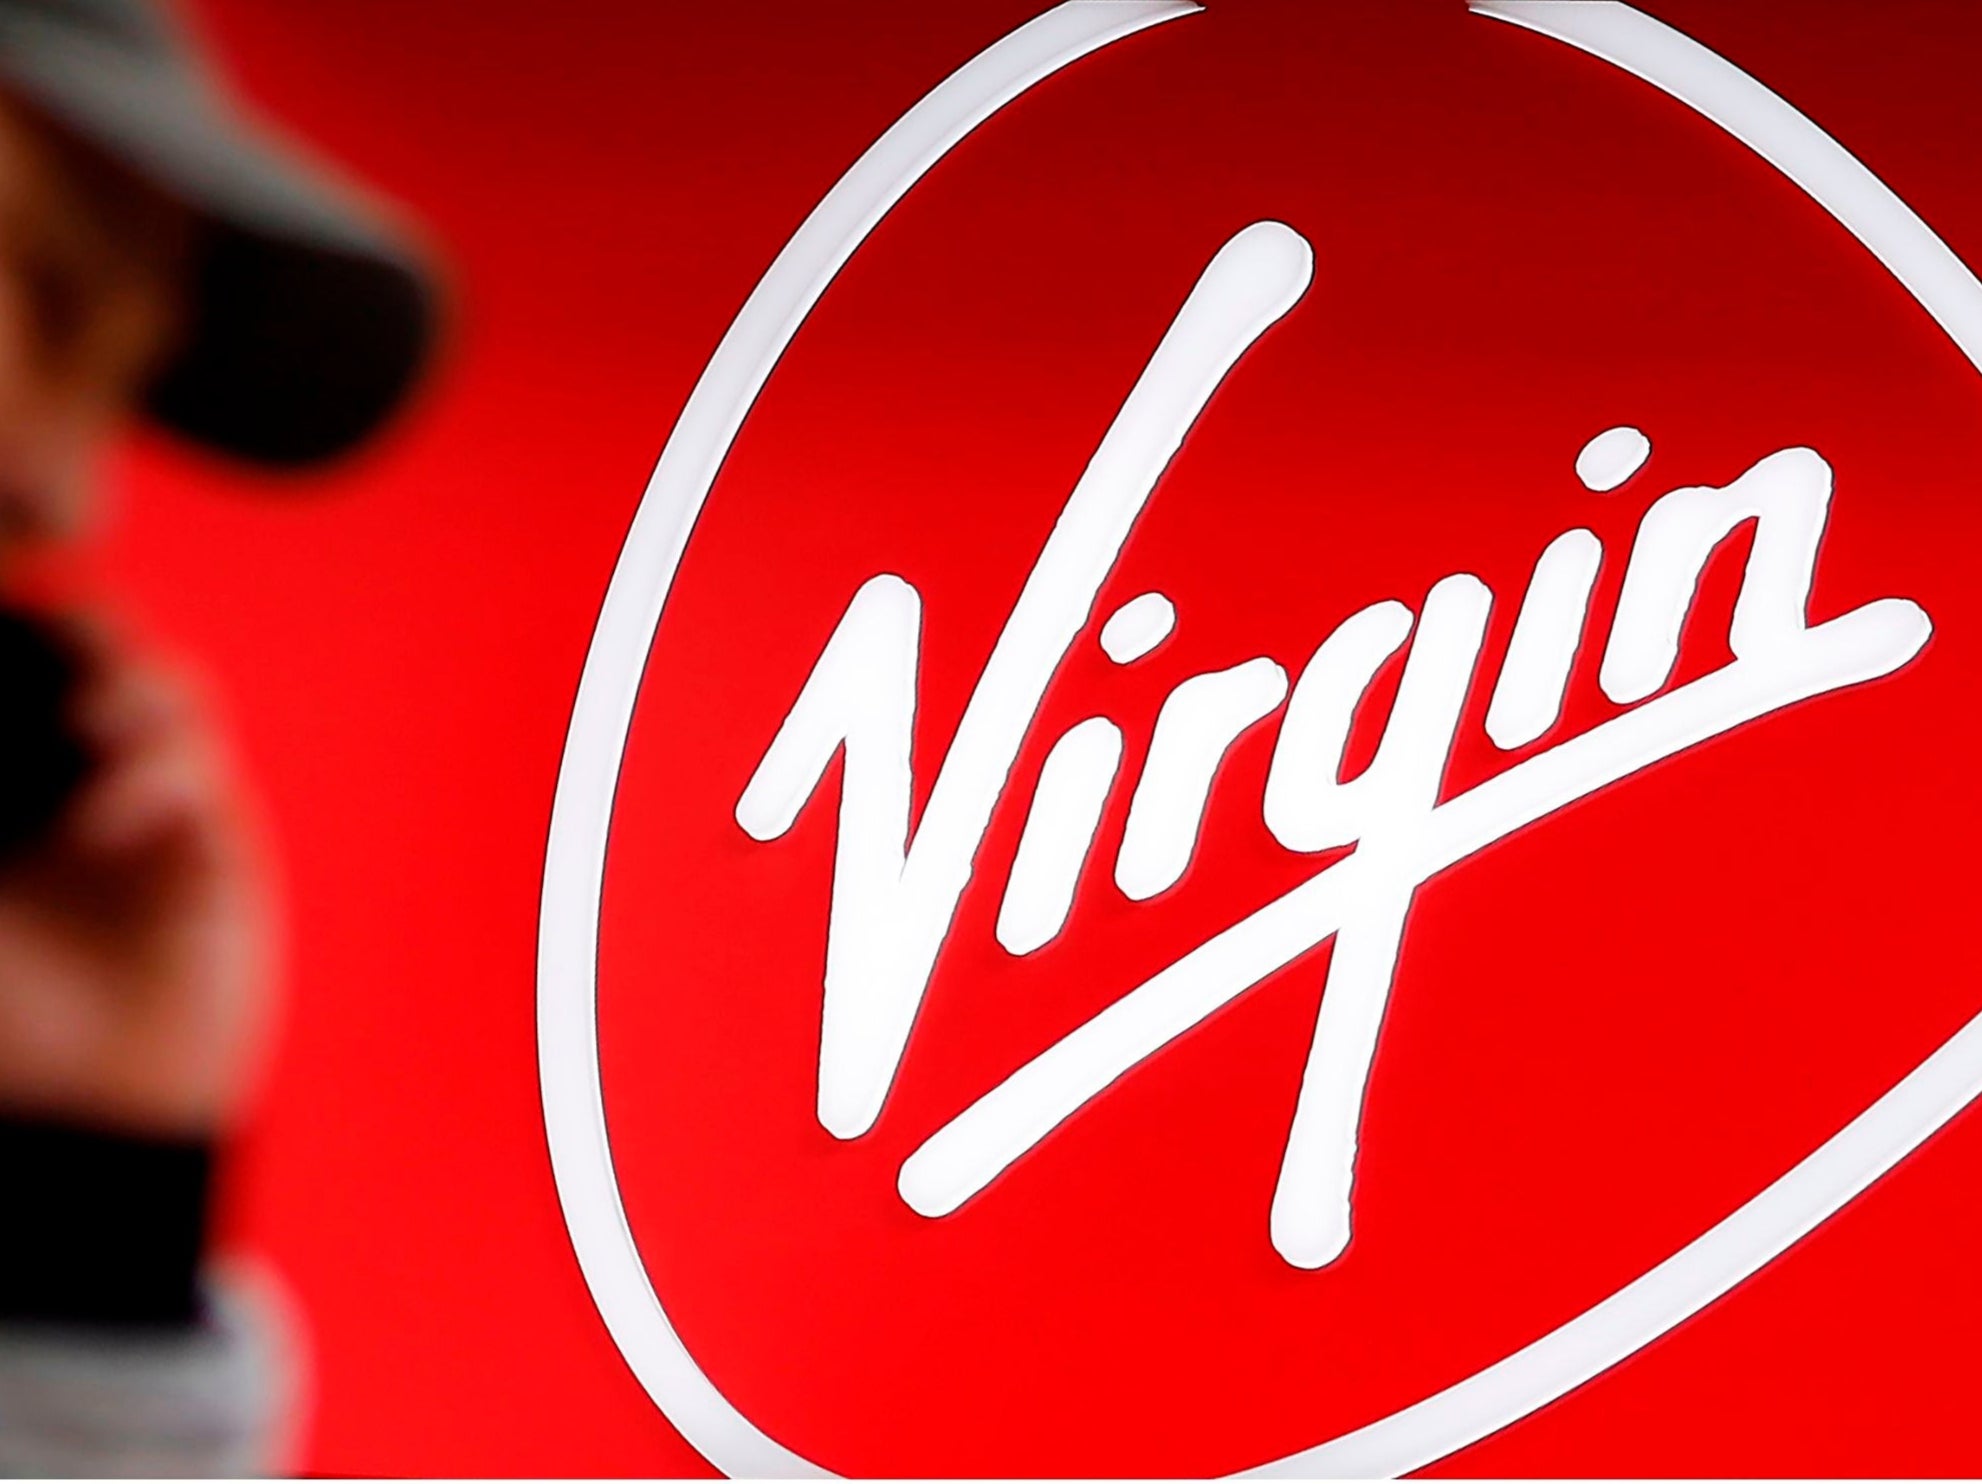 Virgin Media customers in parts of Scotland suffered outages on 28 December, 2022